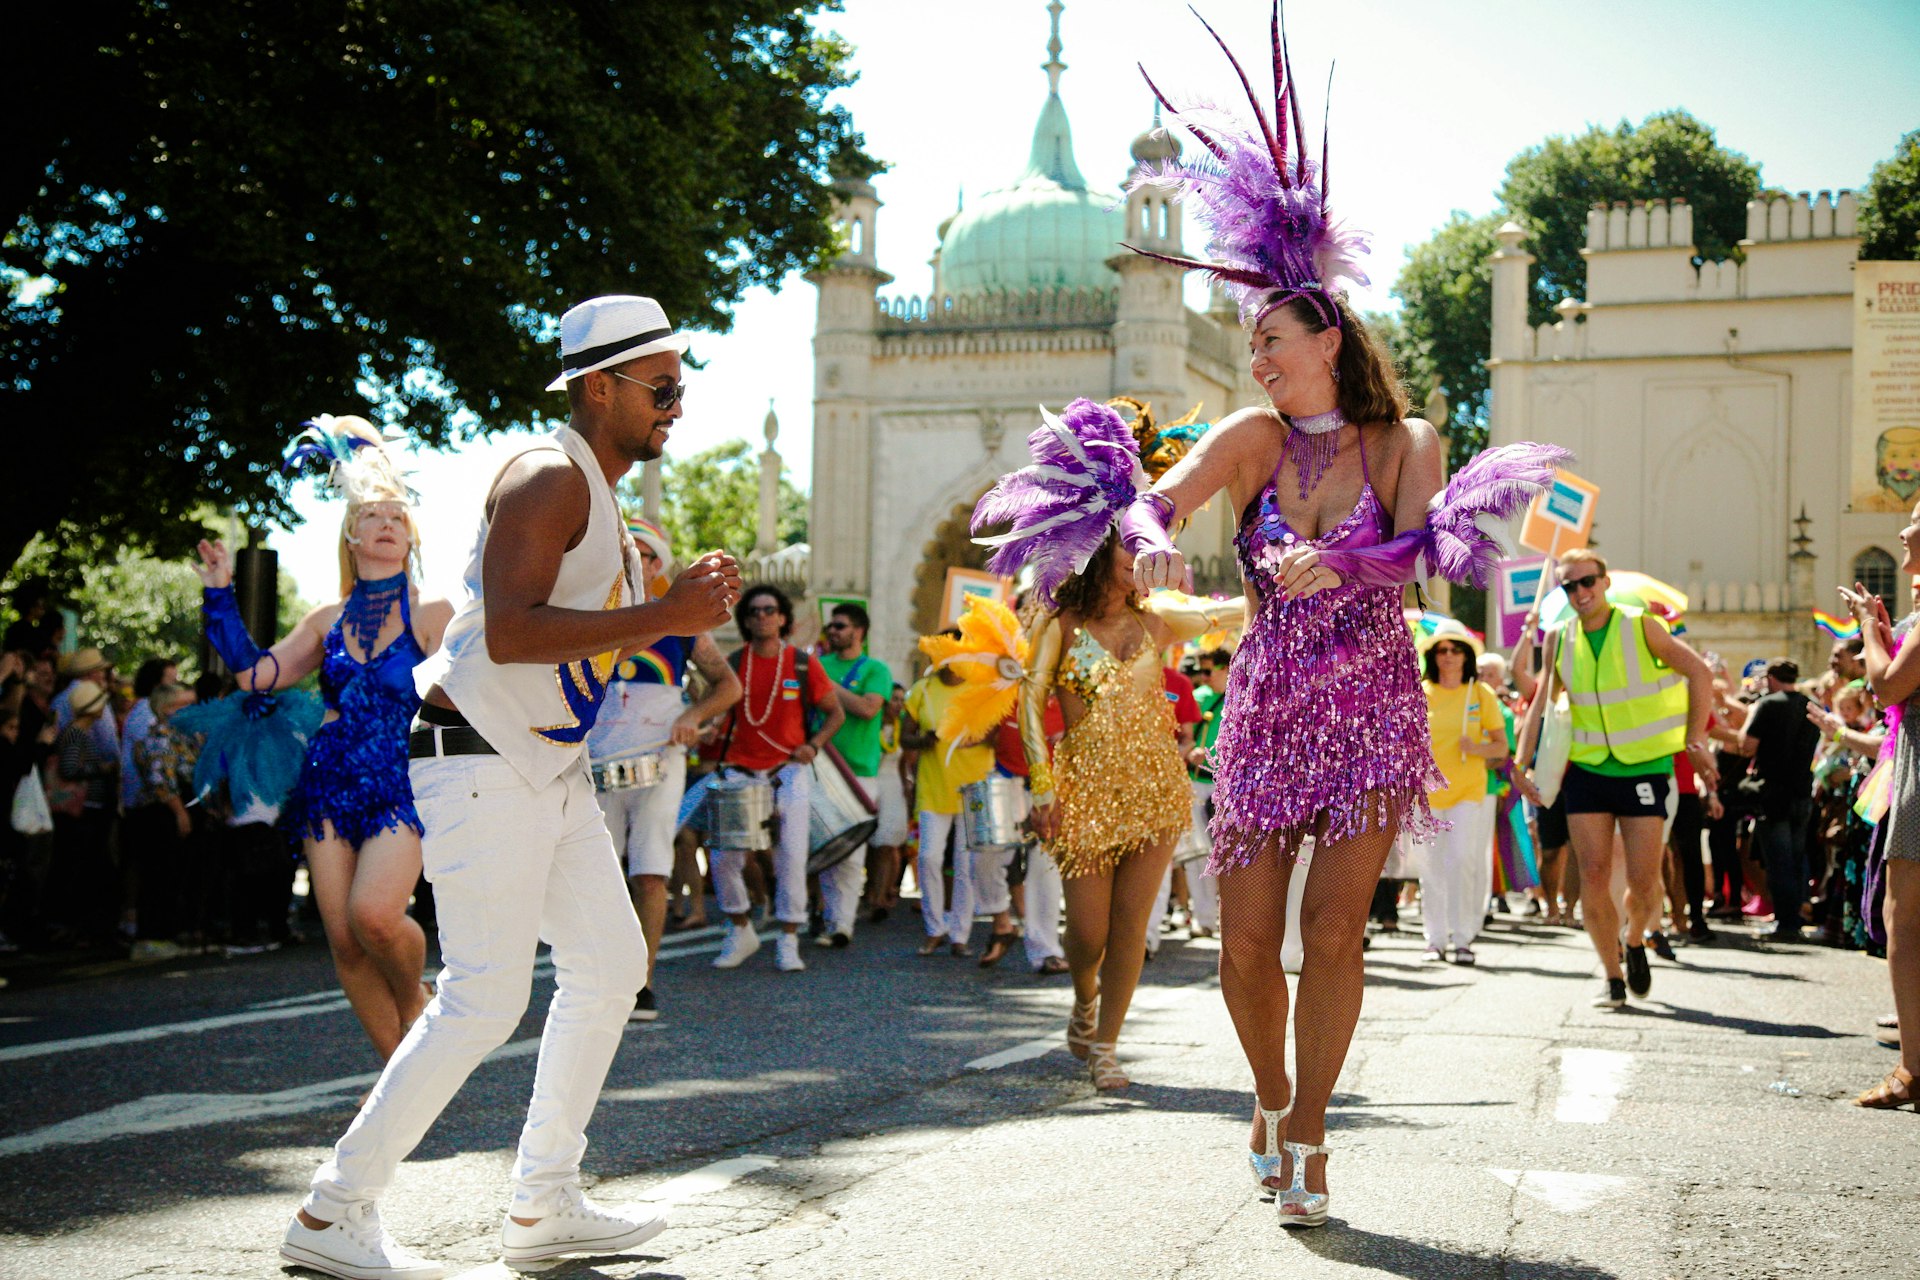 A large group of people in colorful outfits dance in the street outside the Royal Pavilion as part of Brighton's Pride parade